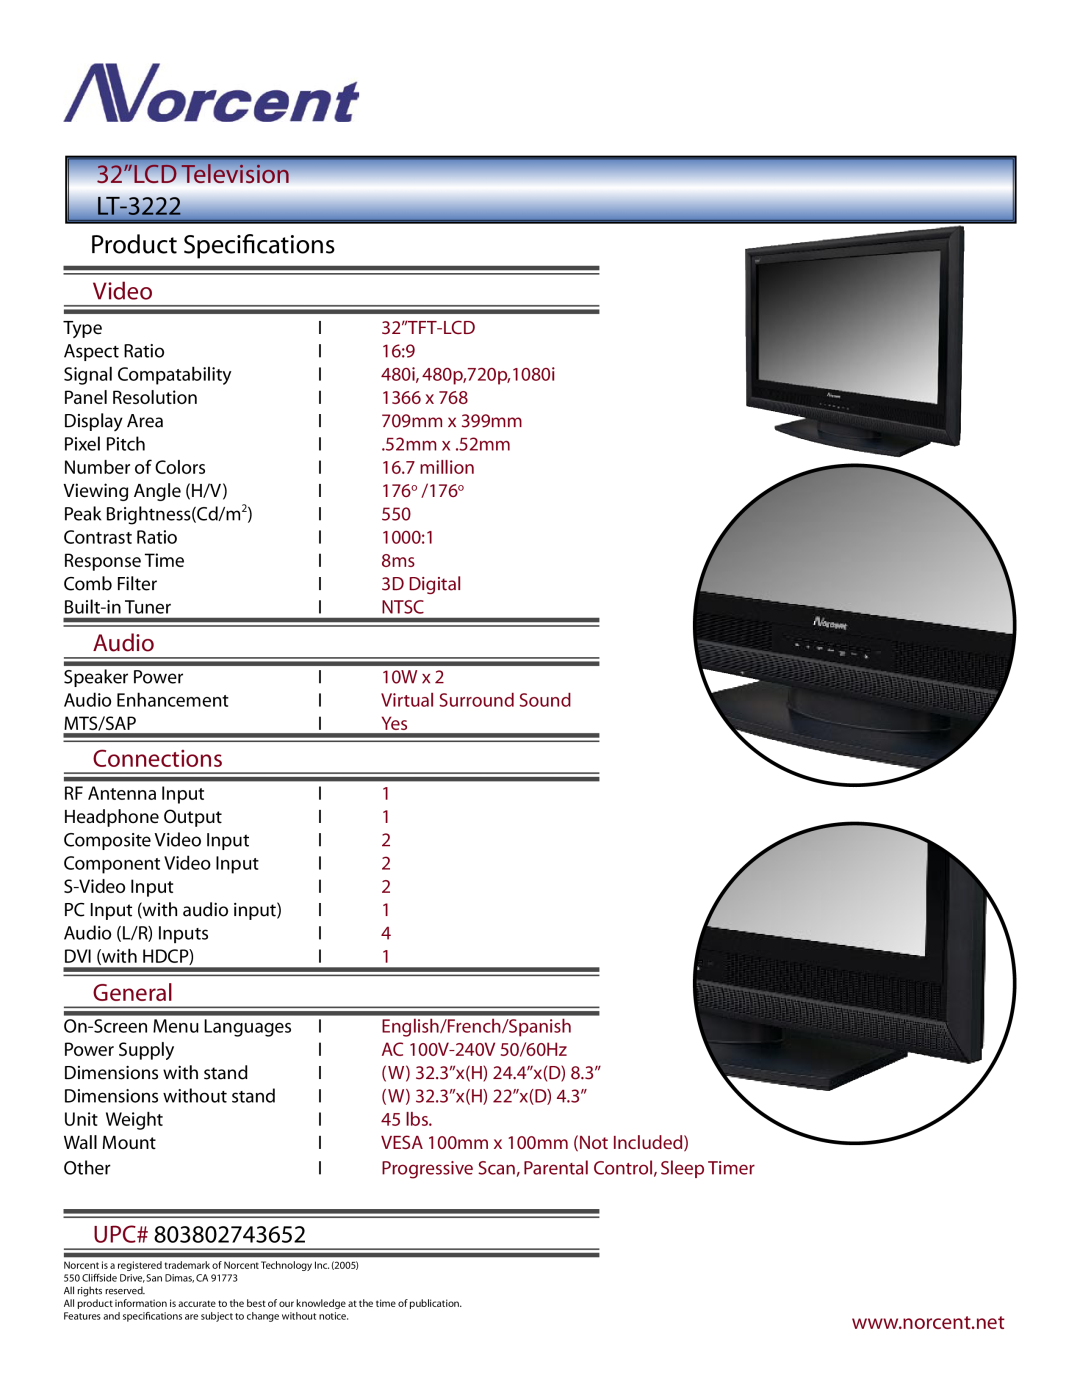 Norcent Technologies manual Product Speciﬁcations, Video, Audio, Connections, General, Upc#, 32”LCD Television LT-3222 